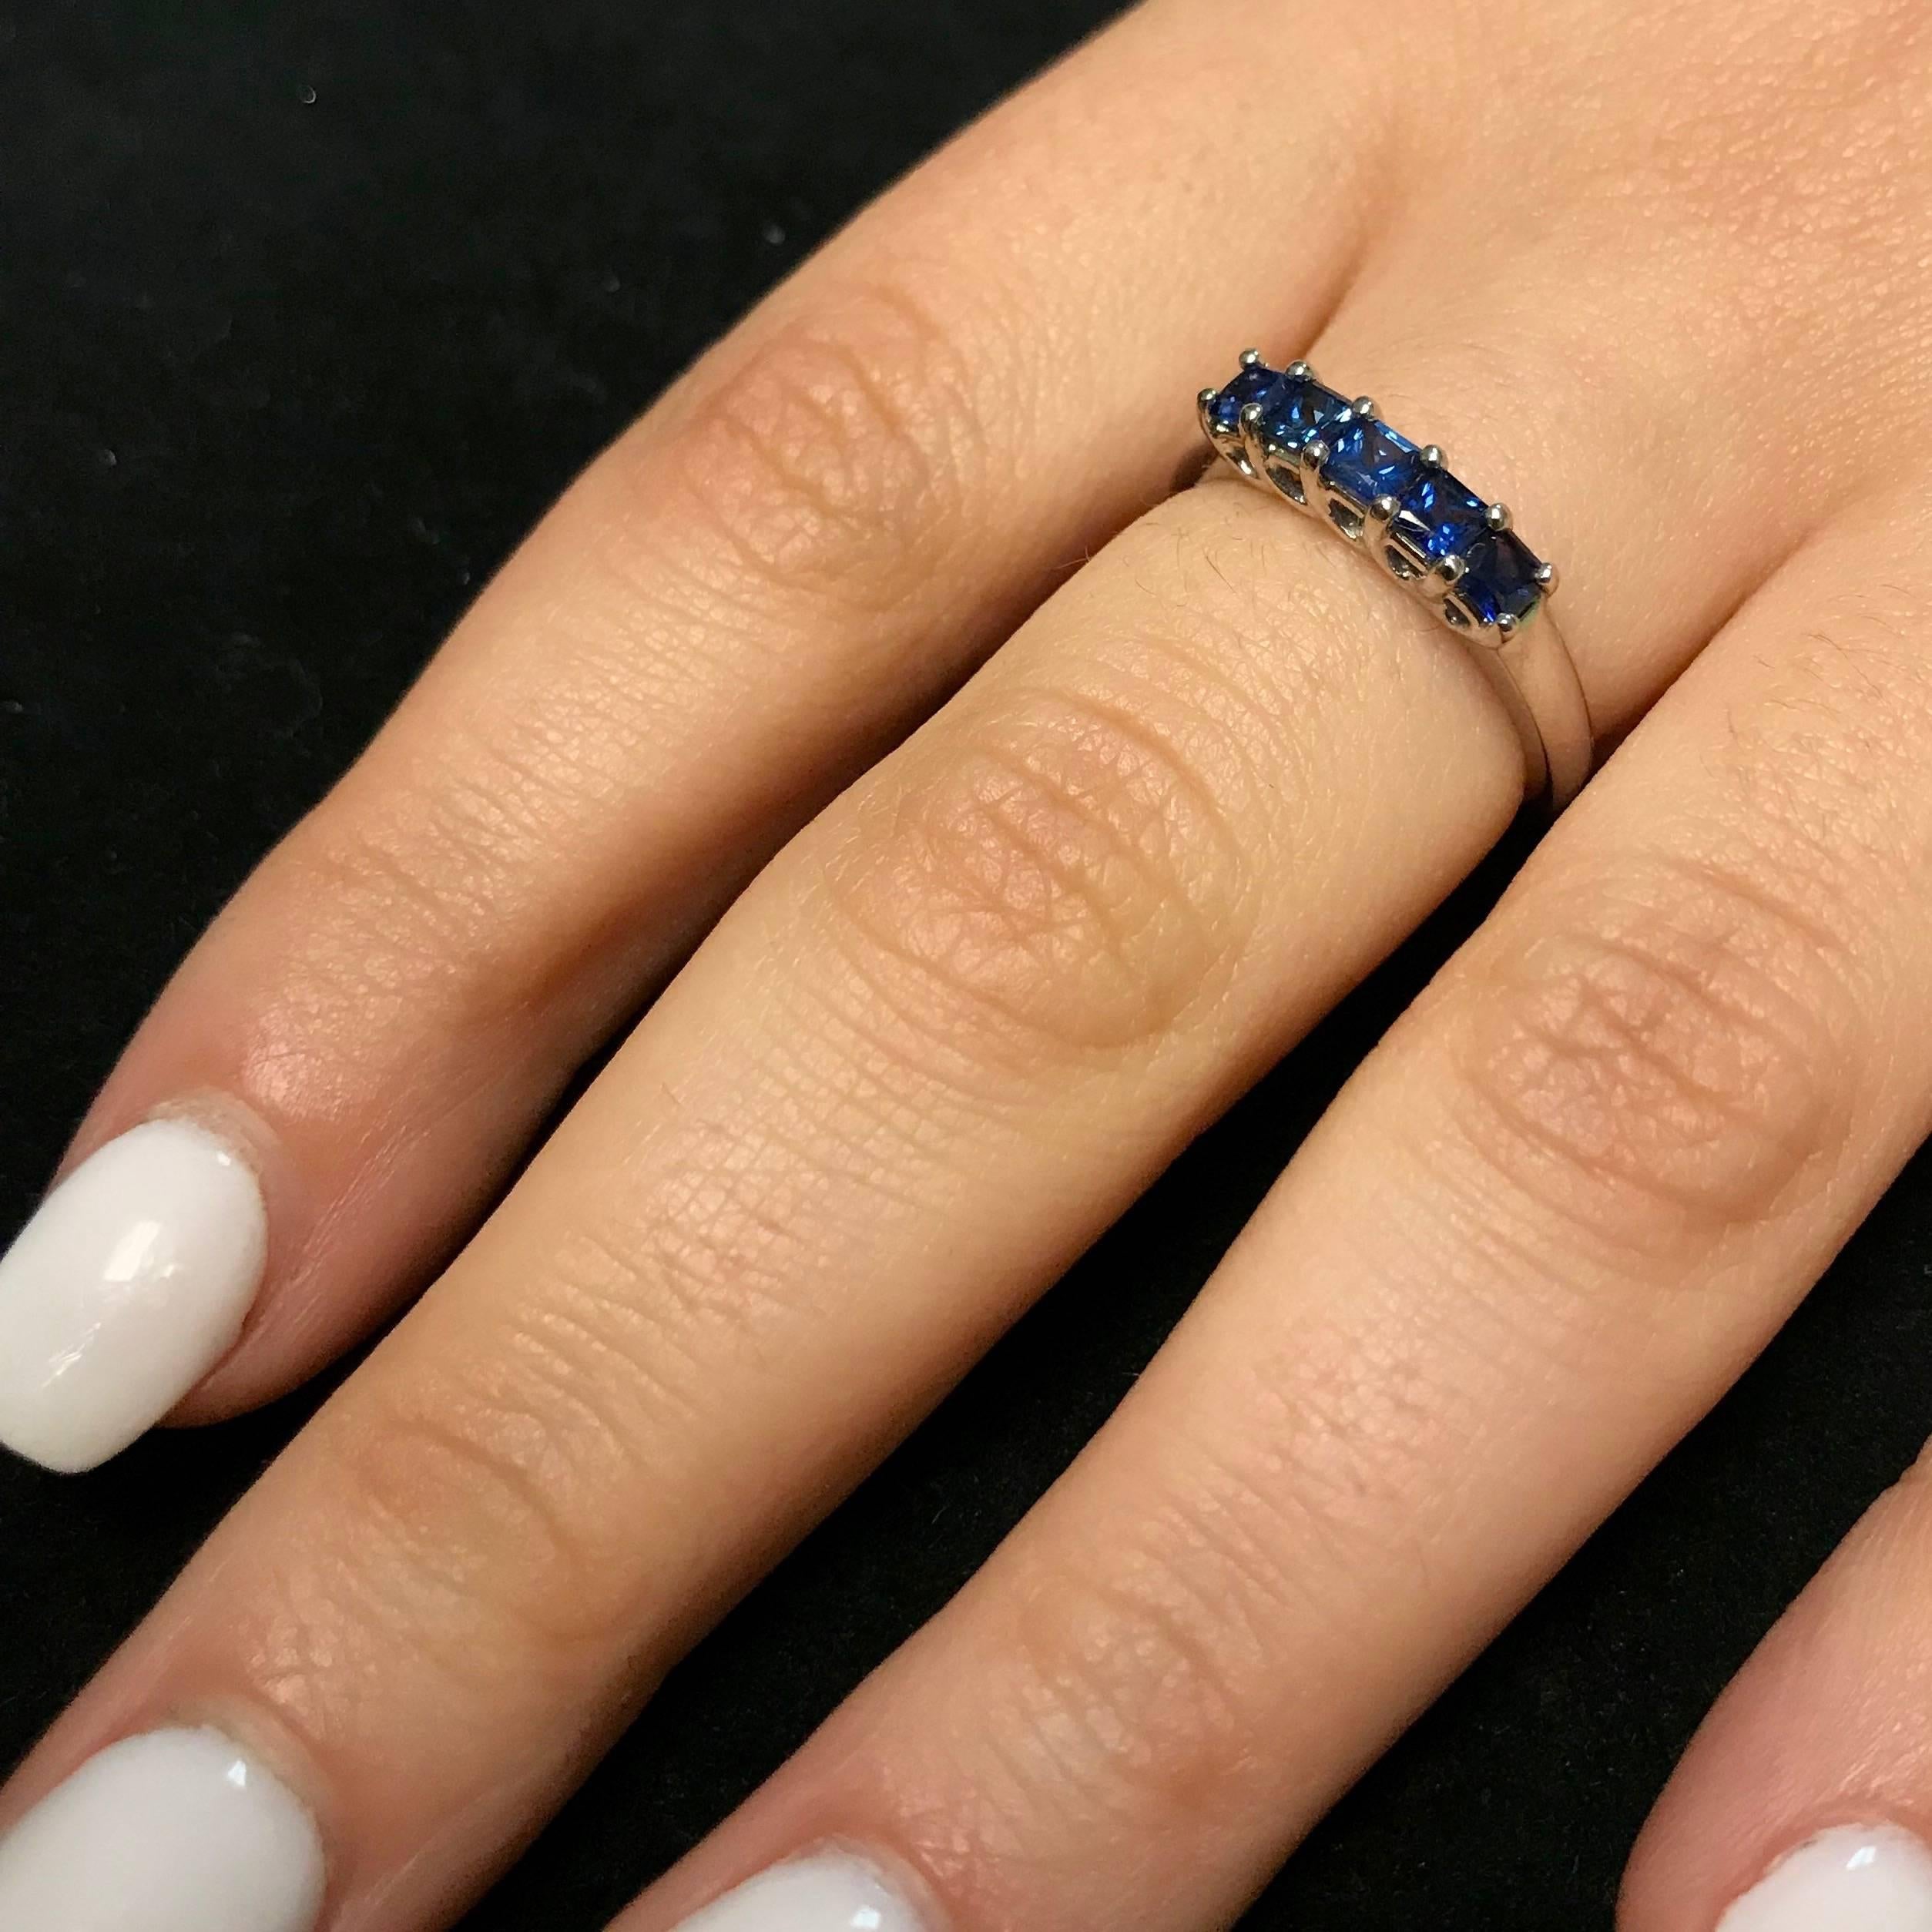 A beautiful and colorful piece, this ring features 5 princess cut blue sapphires encased in 14K White Gold.

Material: 14k White Gold
Gemstones: 5 Princess Cut Blue Sapphires at 0.84 Carats. Measuring 3mm.
Ring Size: 6. Alberto offers complimentary